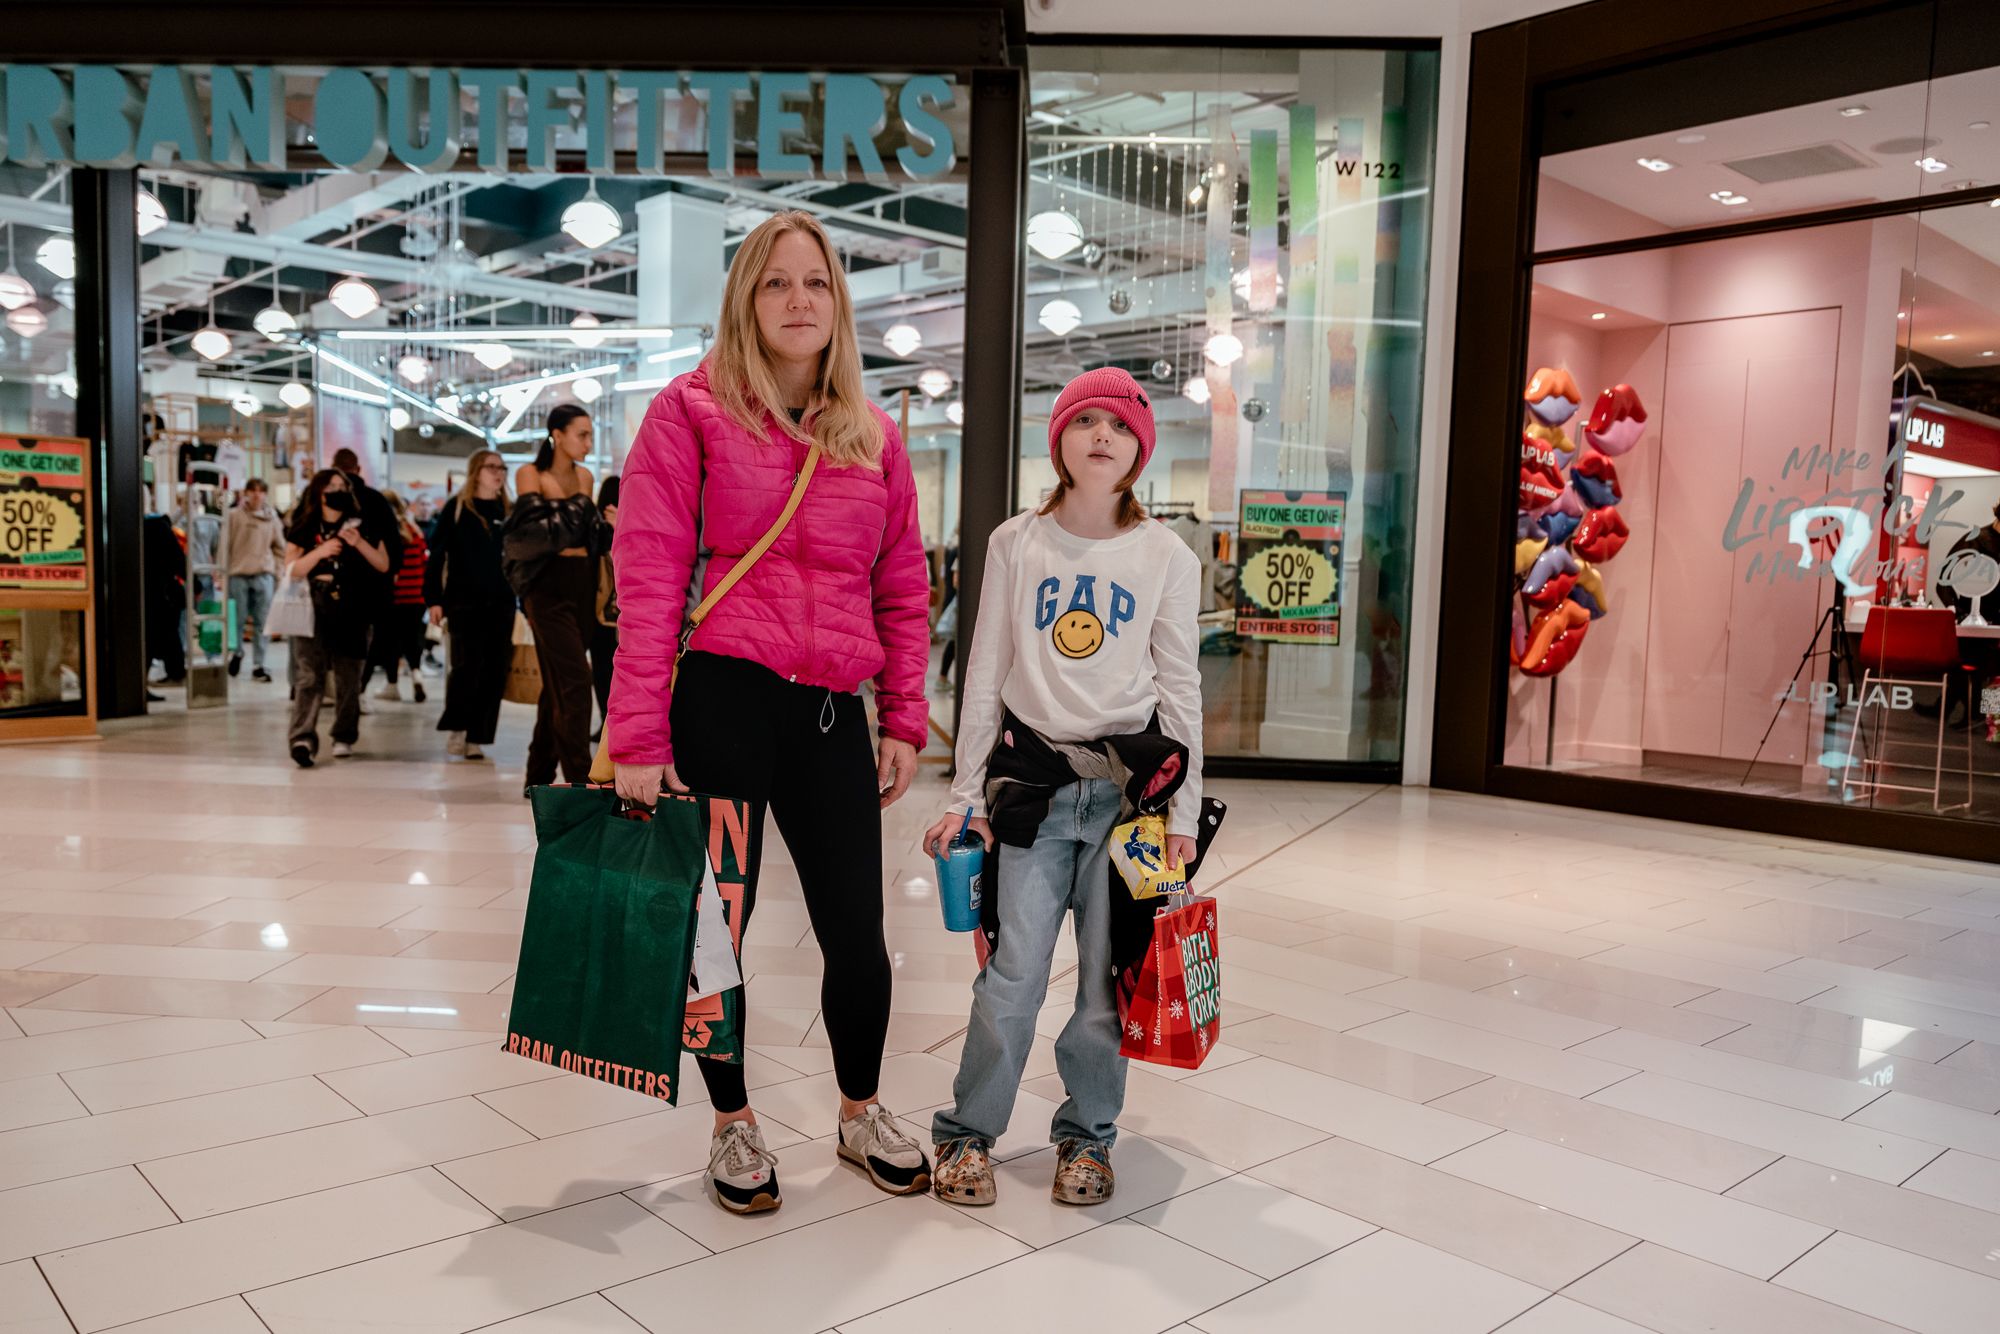 Inside the Mall of America - Shopping, Attractions and the